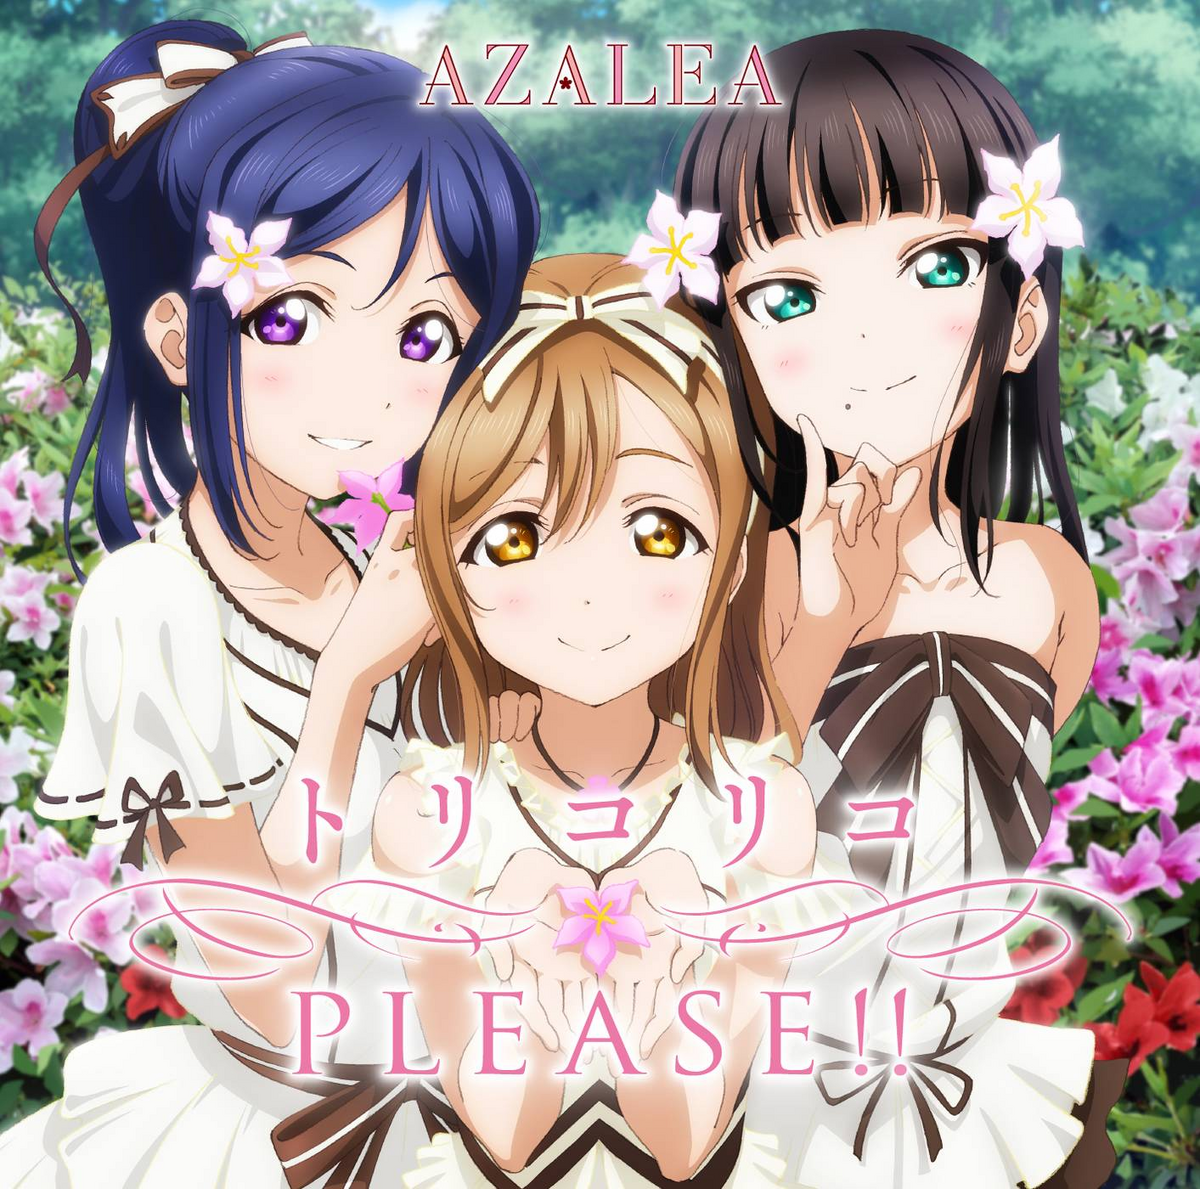 Album Art of Azalea for the live action Wondering if it might